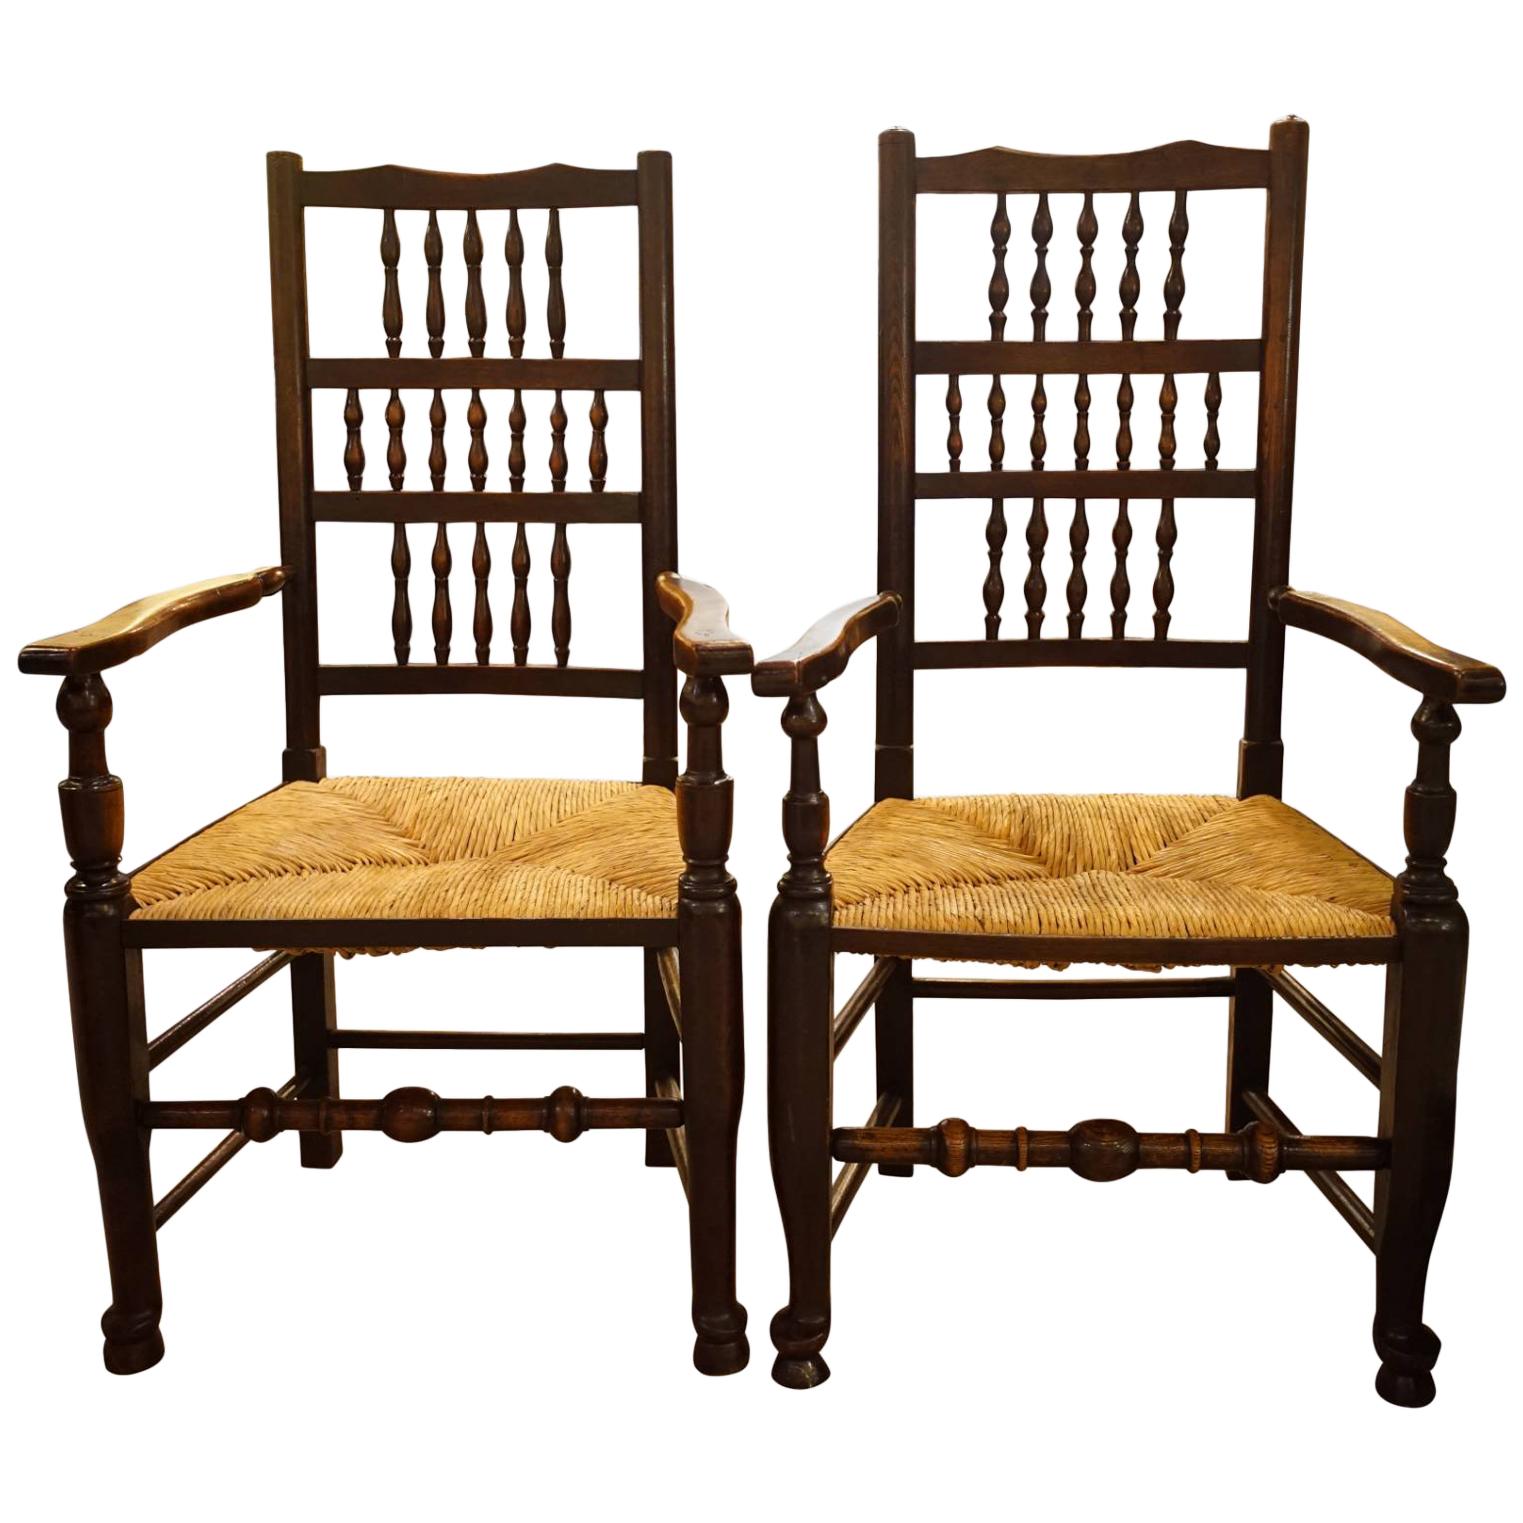 Pair of Beech and Elm Spindle Back Armchairs